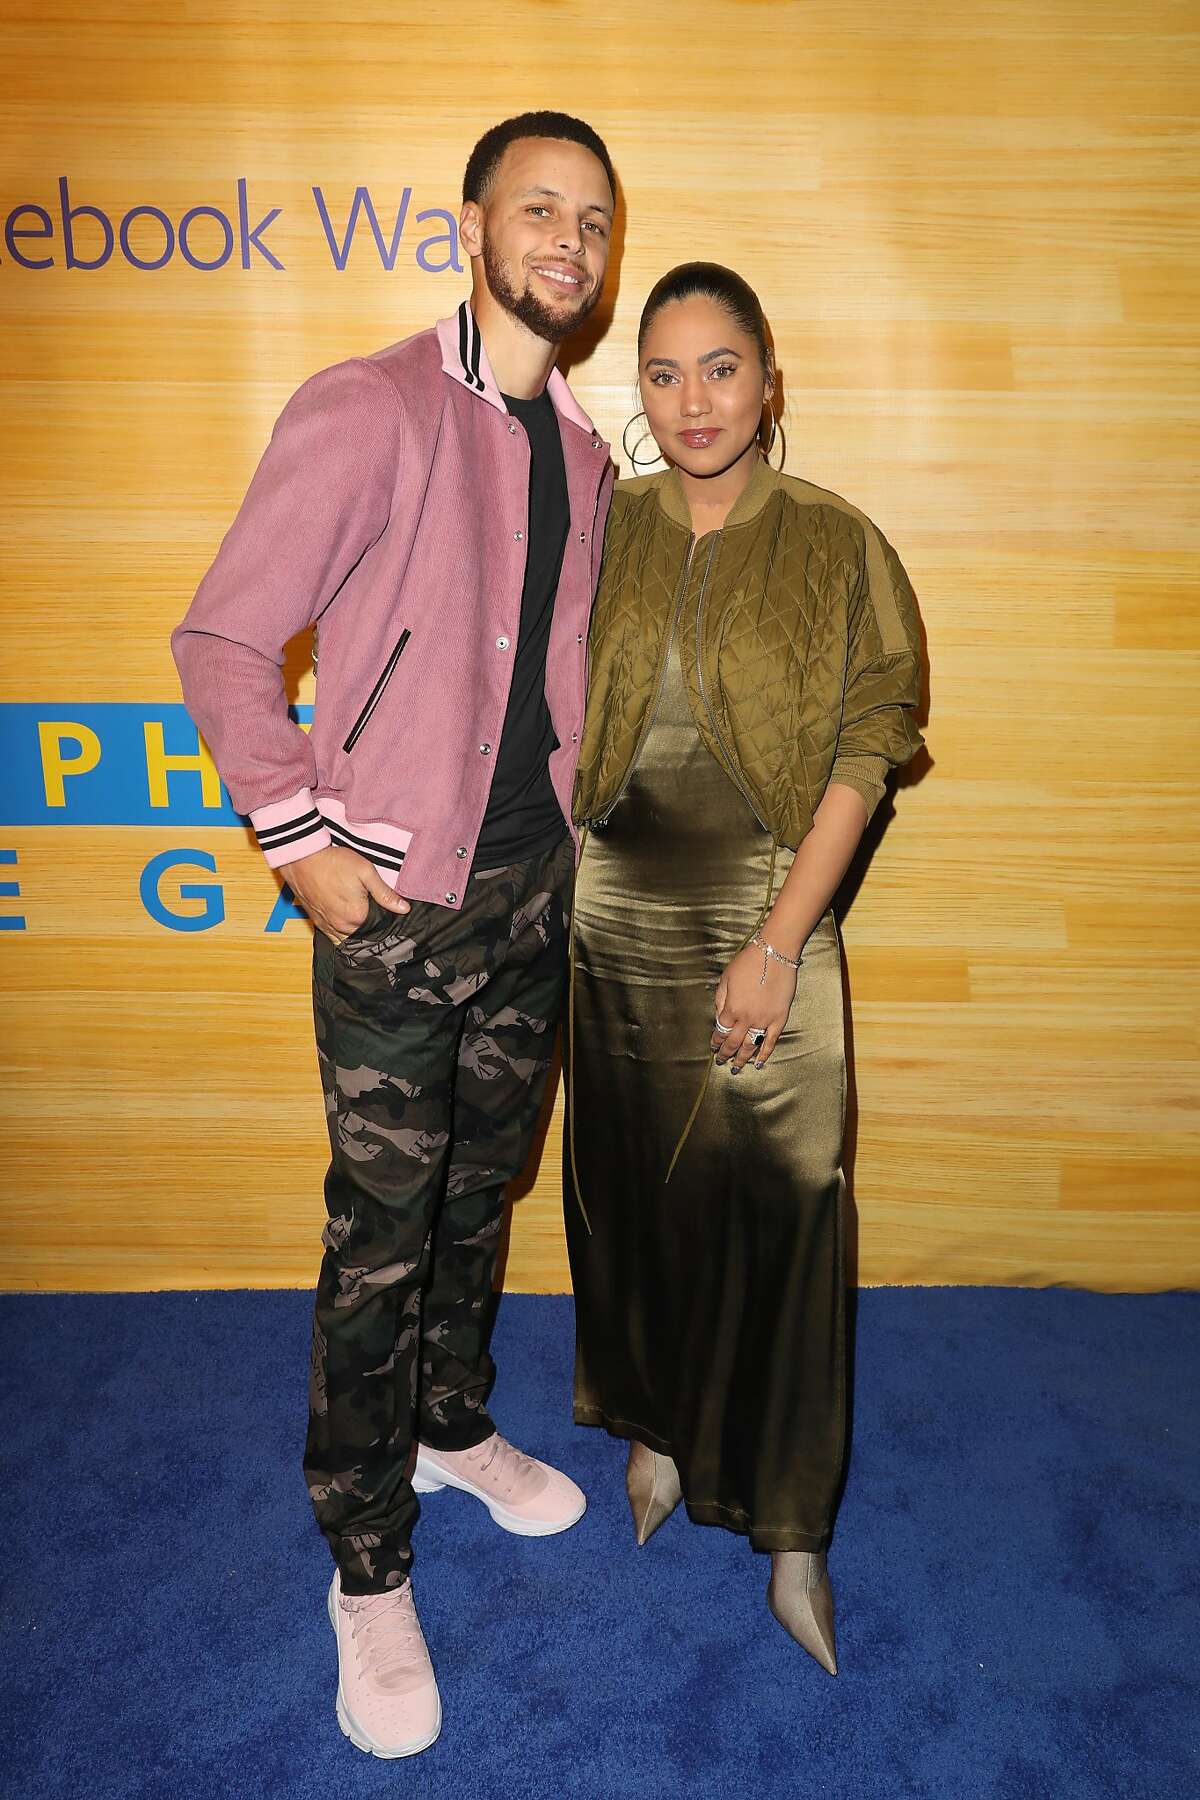 OAKLAND, CALIFORNIA - MARCH 31: Stephen and Ayesha Curry pose for a photo on the red carpet at 16th Street Station on April 1, 2019 in Oakland, California. (Photo by Kelly Sullivan/Getty Images for Facebook)